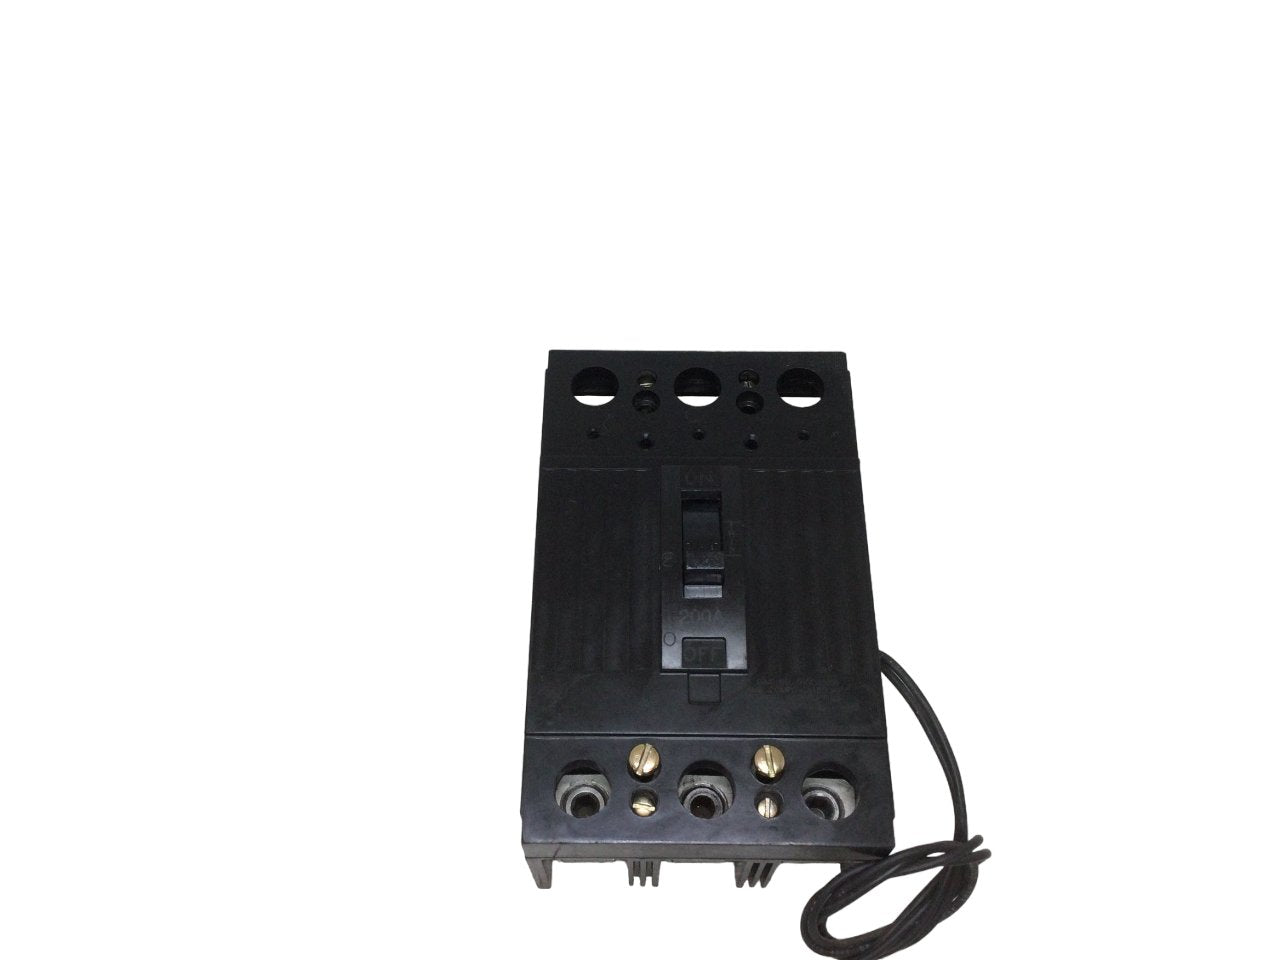 THQD32200ST1 - General Electrics - Molded Case Circuit Breakers
